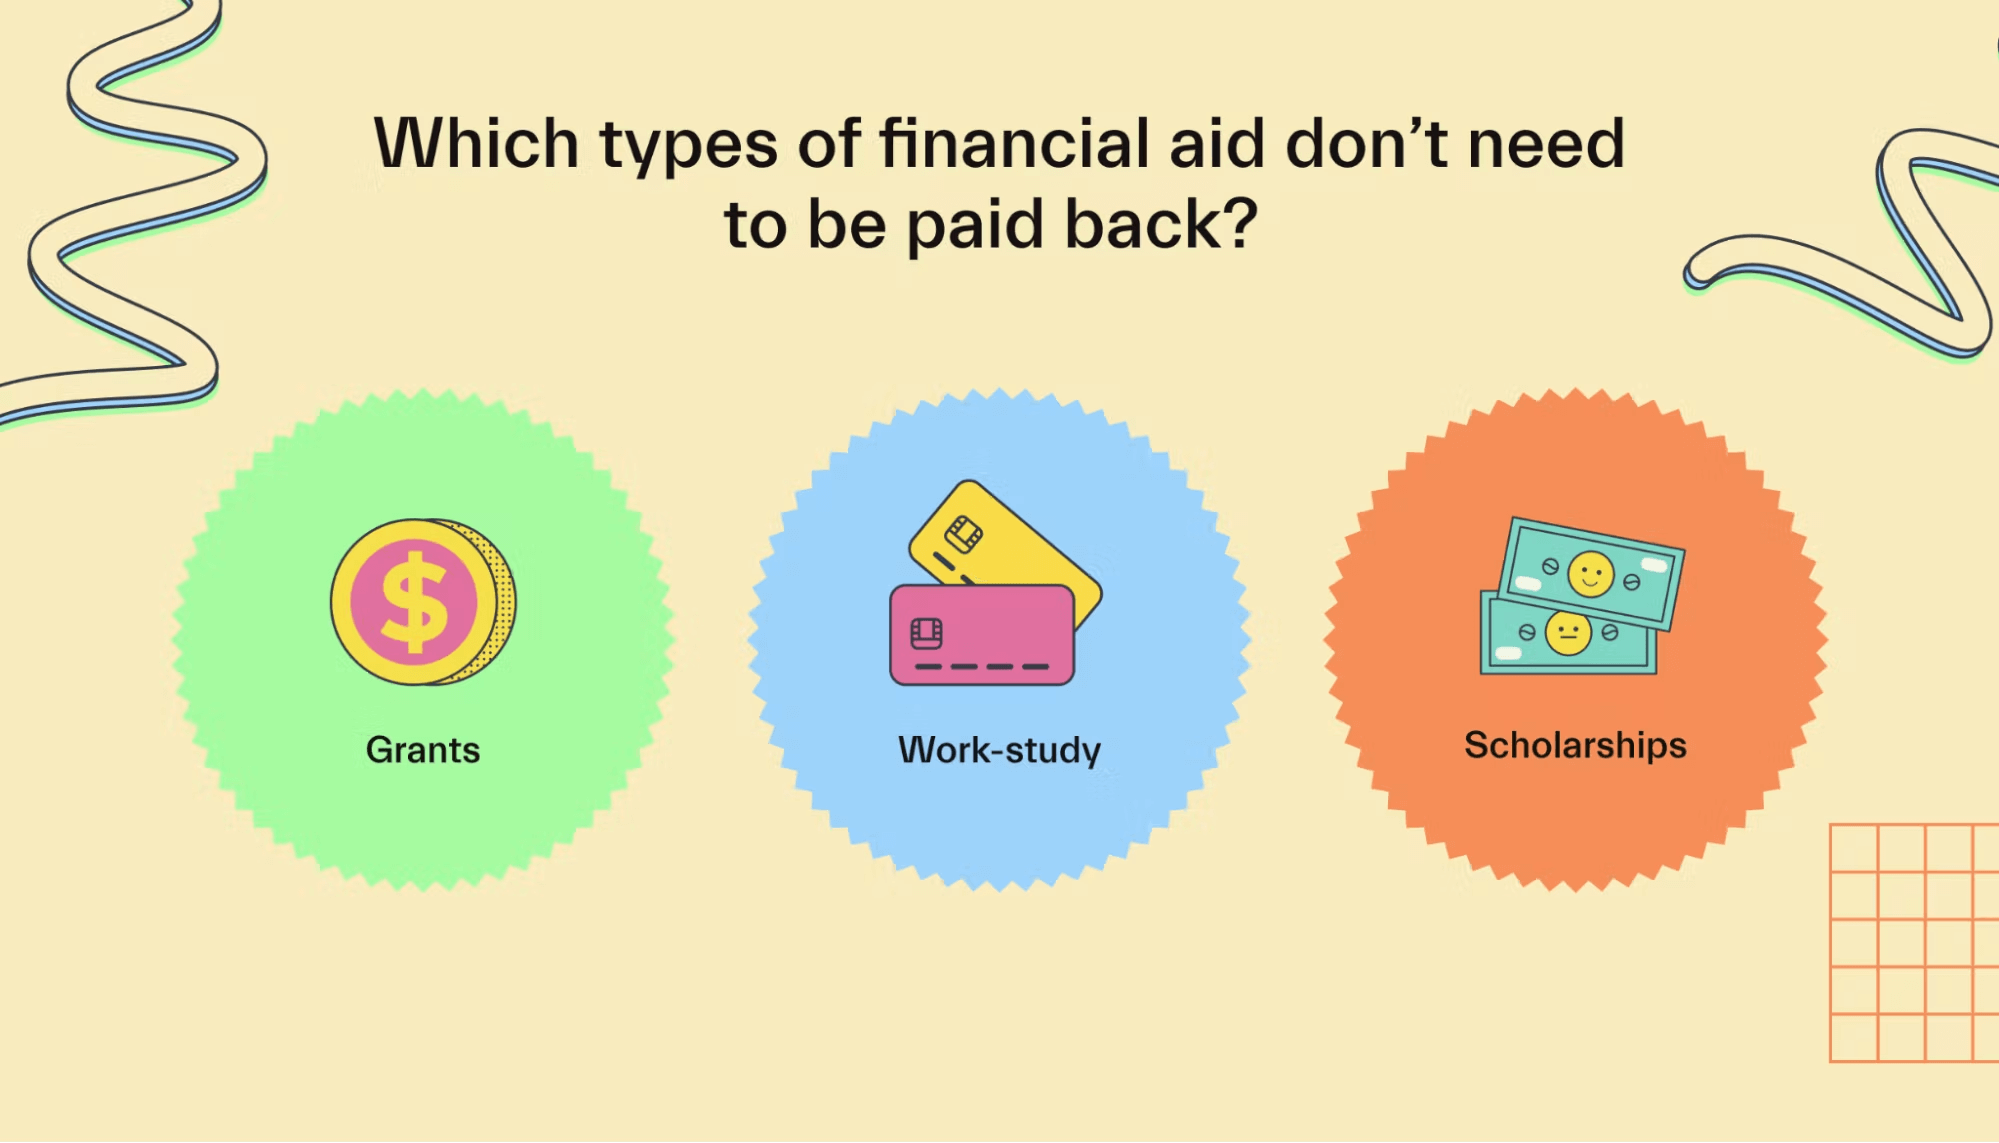 Which types of financial aid don’t need to be paid back?